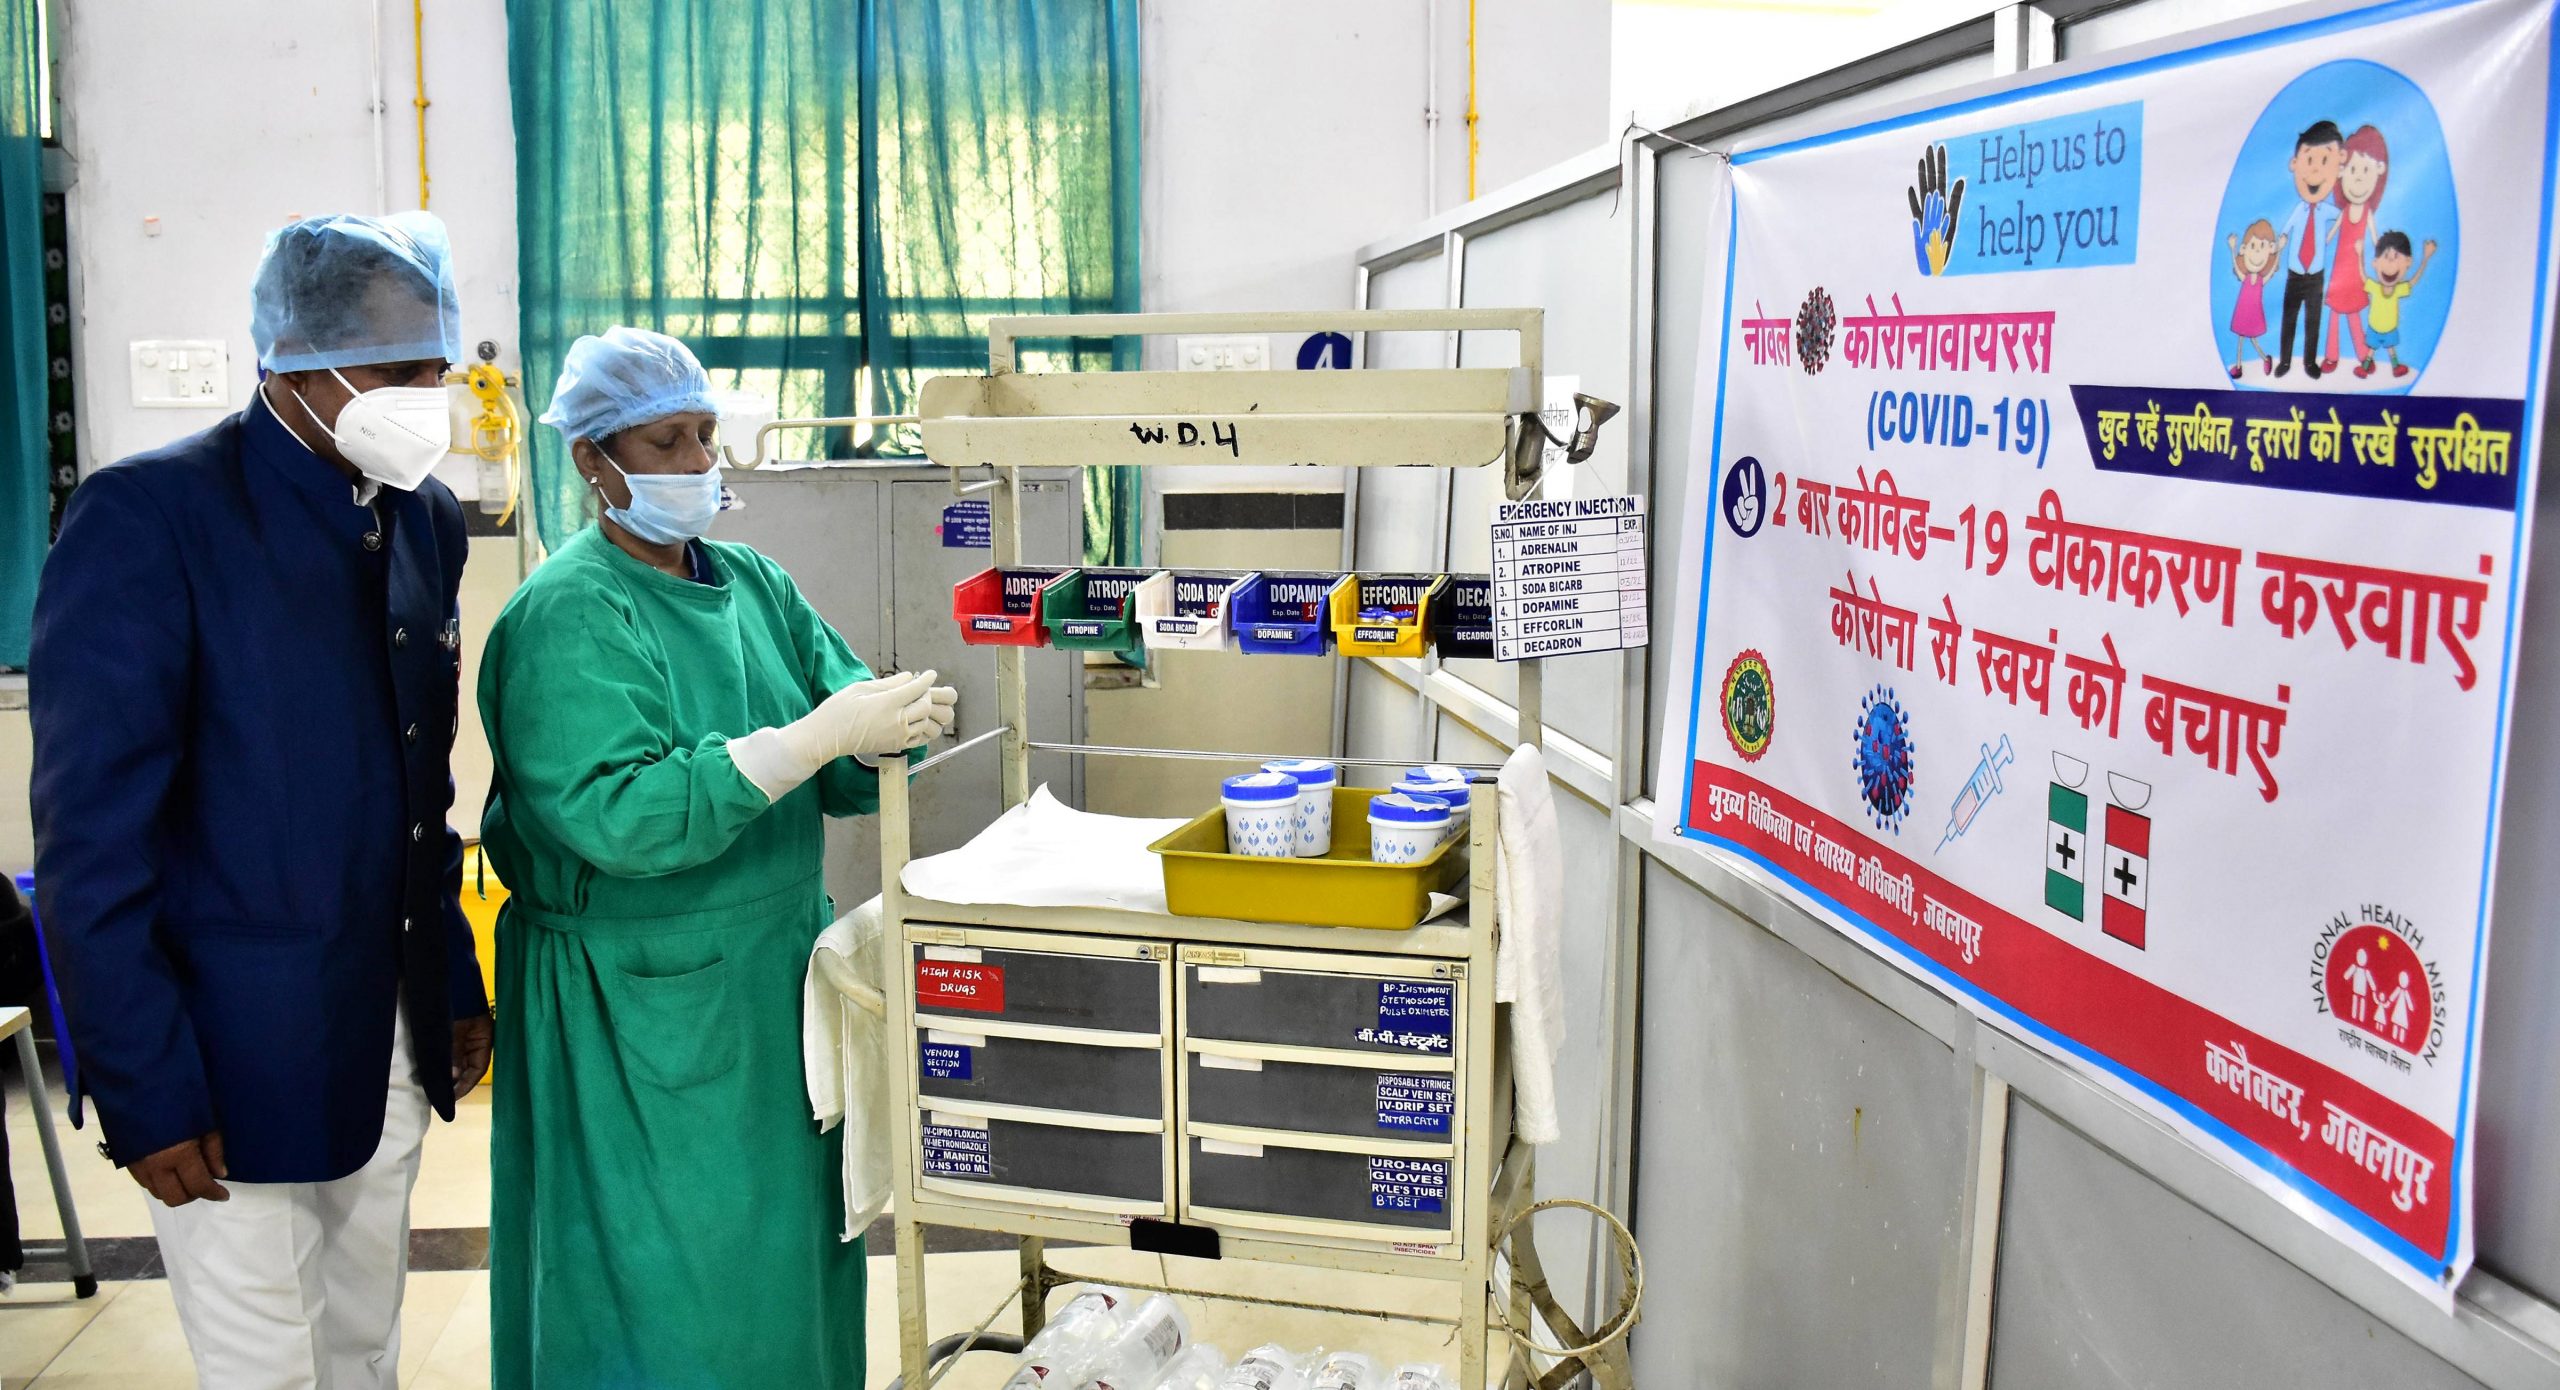 ‘Beginning of the end of COVID-19’: India set to witness world’s biggest vaccine drive